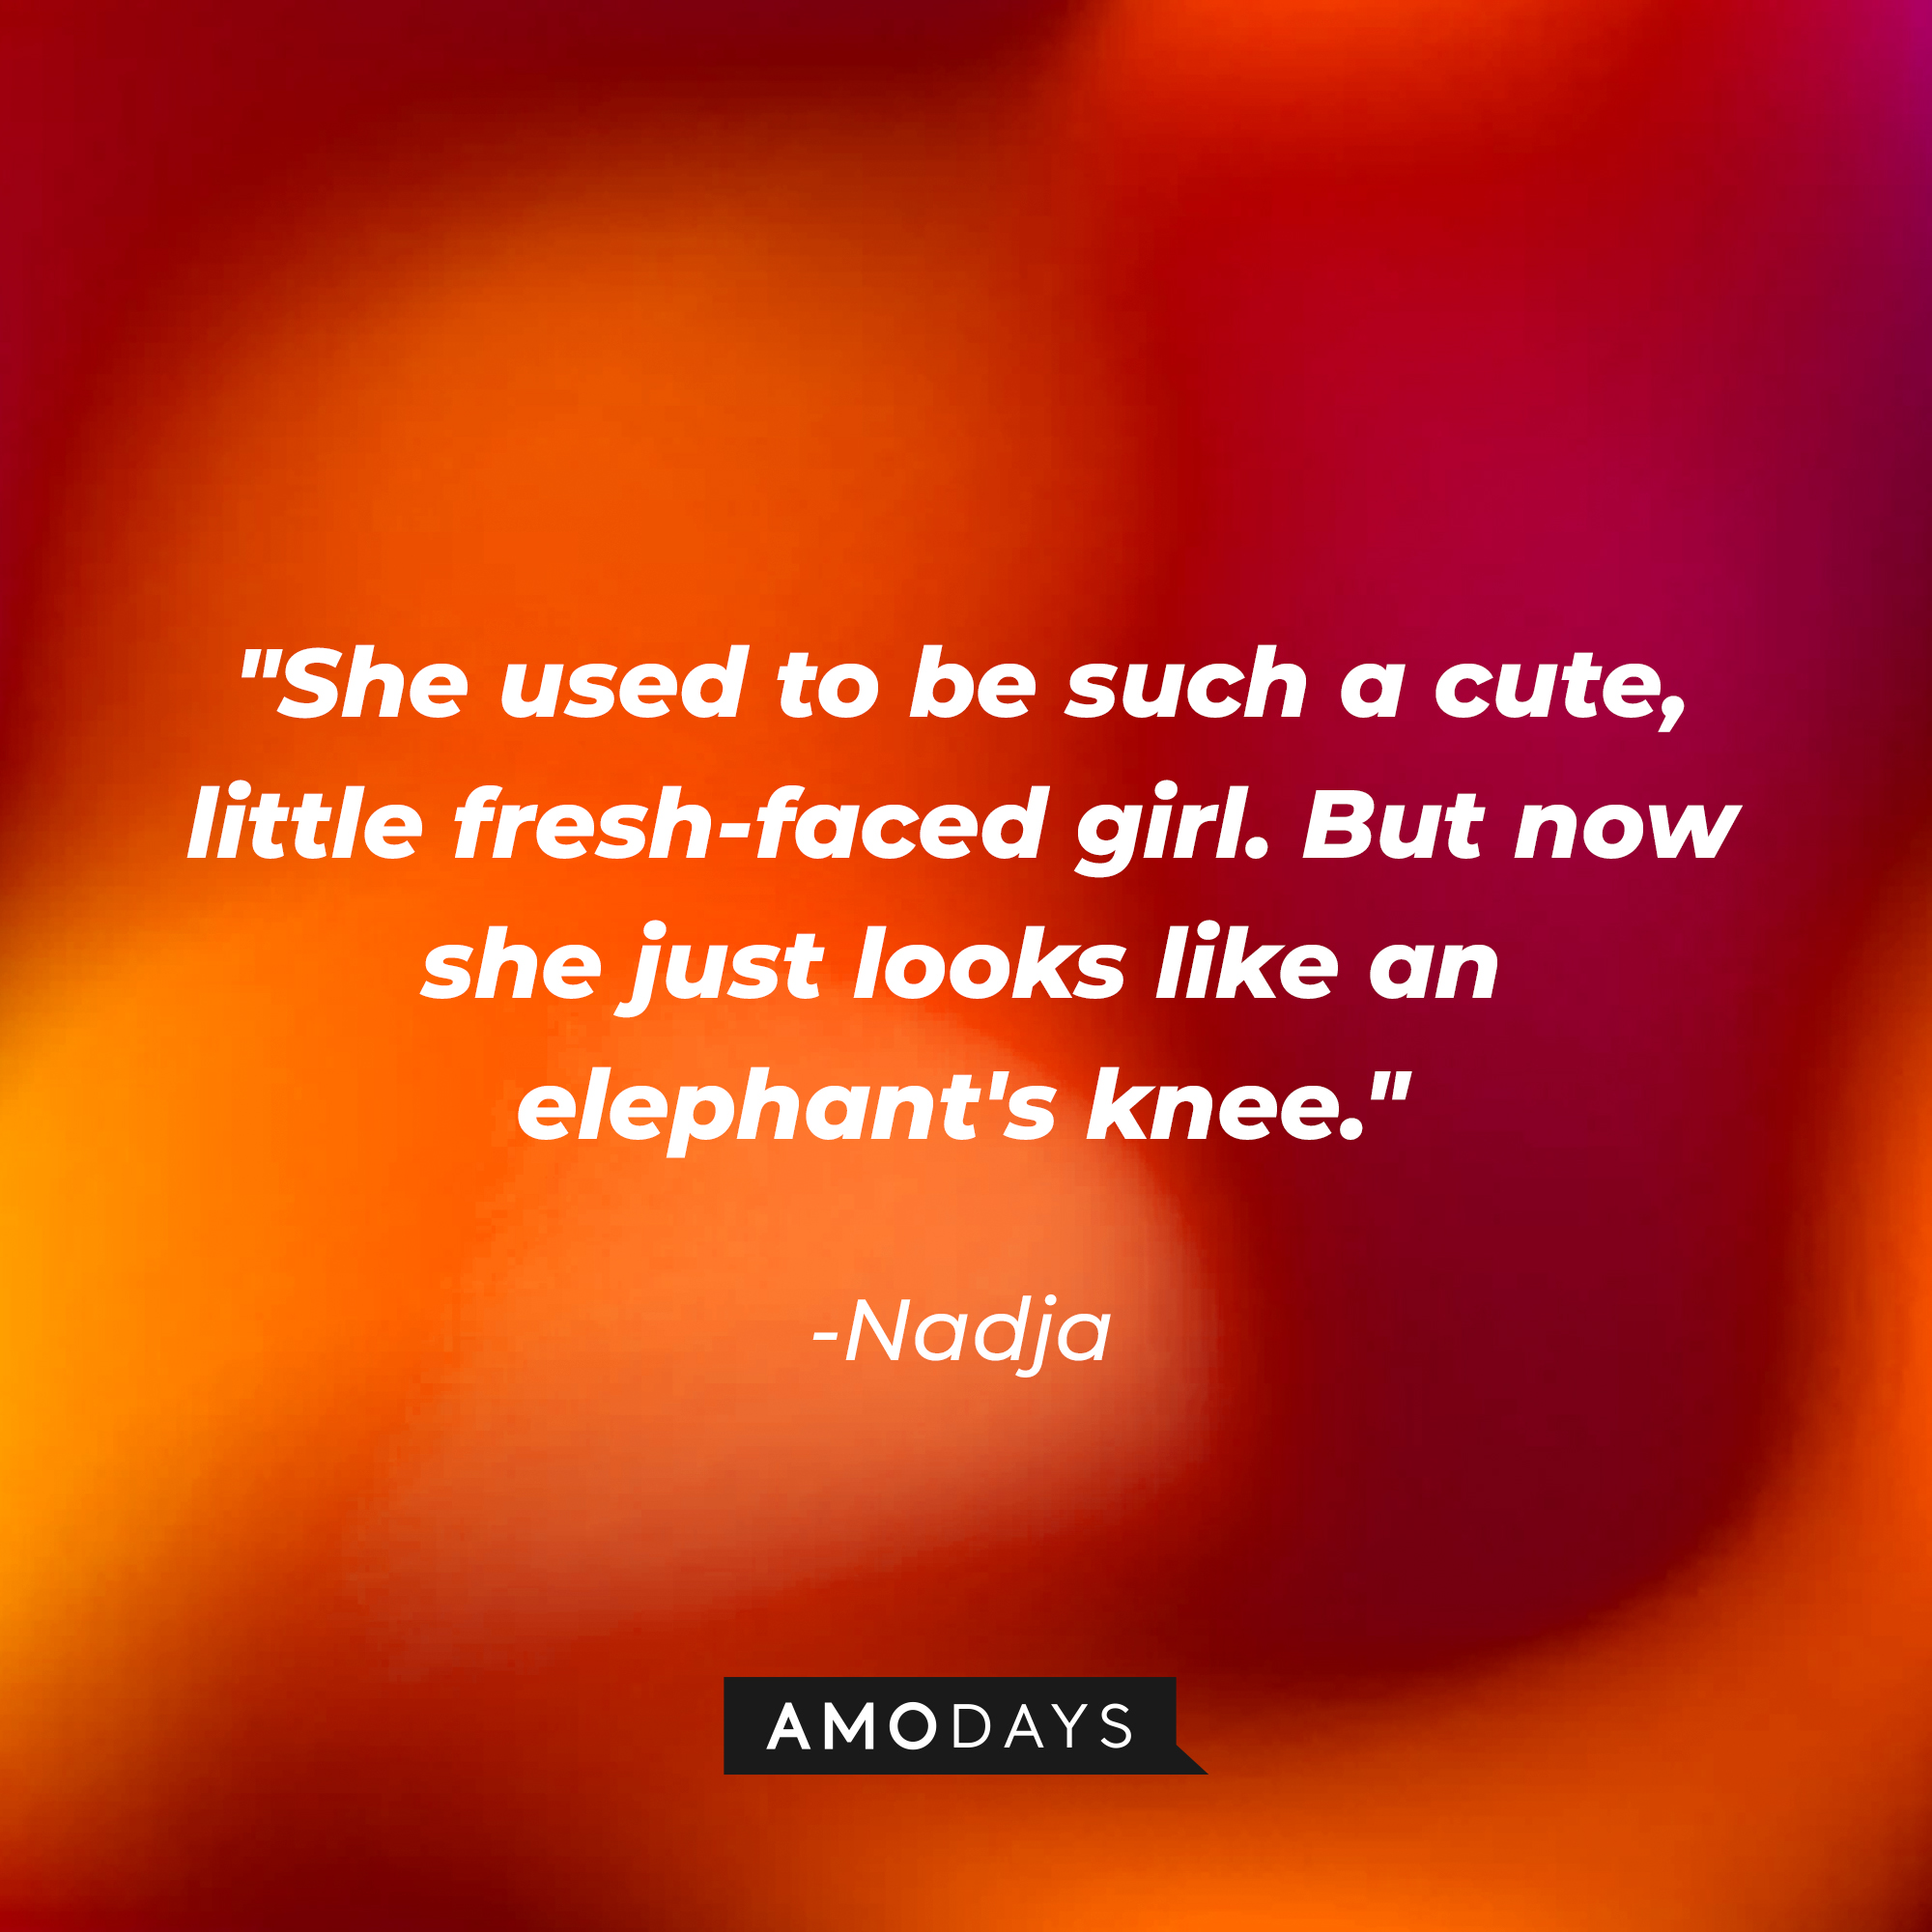 Nadja’s quote: "She used to be such a cute, little fresh-faced girl. But now she just looks like an elephant's knee." | Source: Amodays